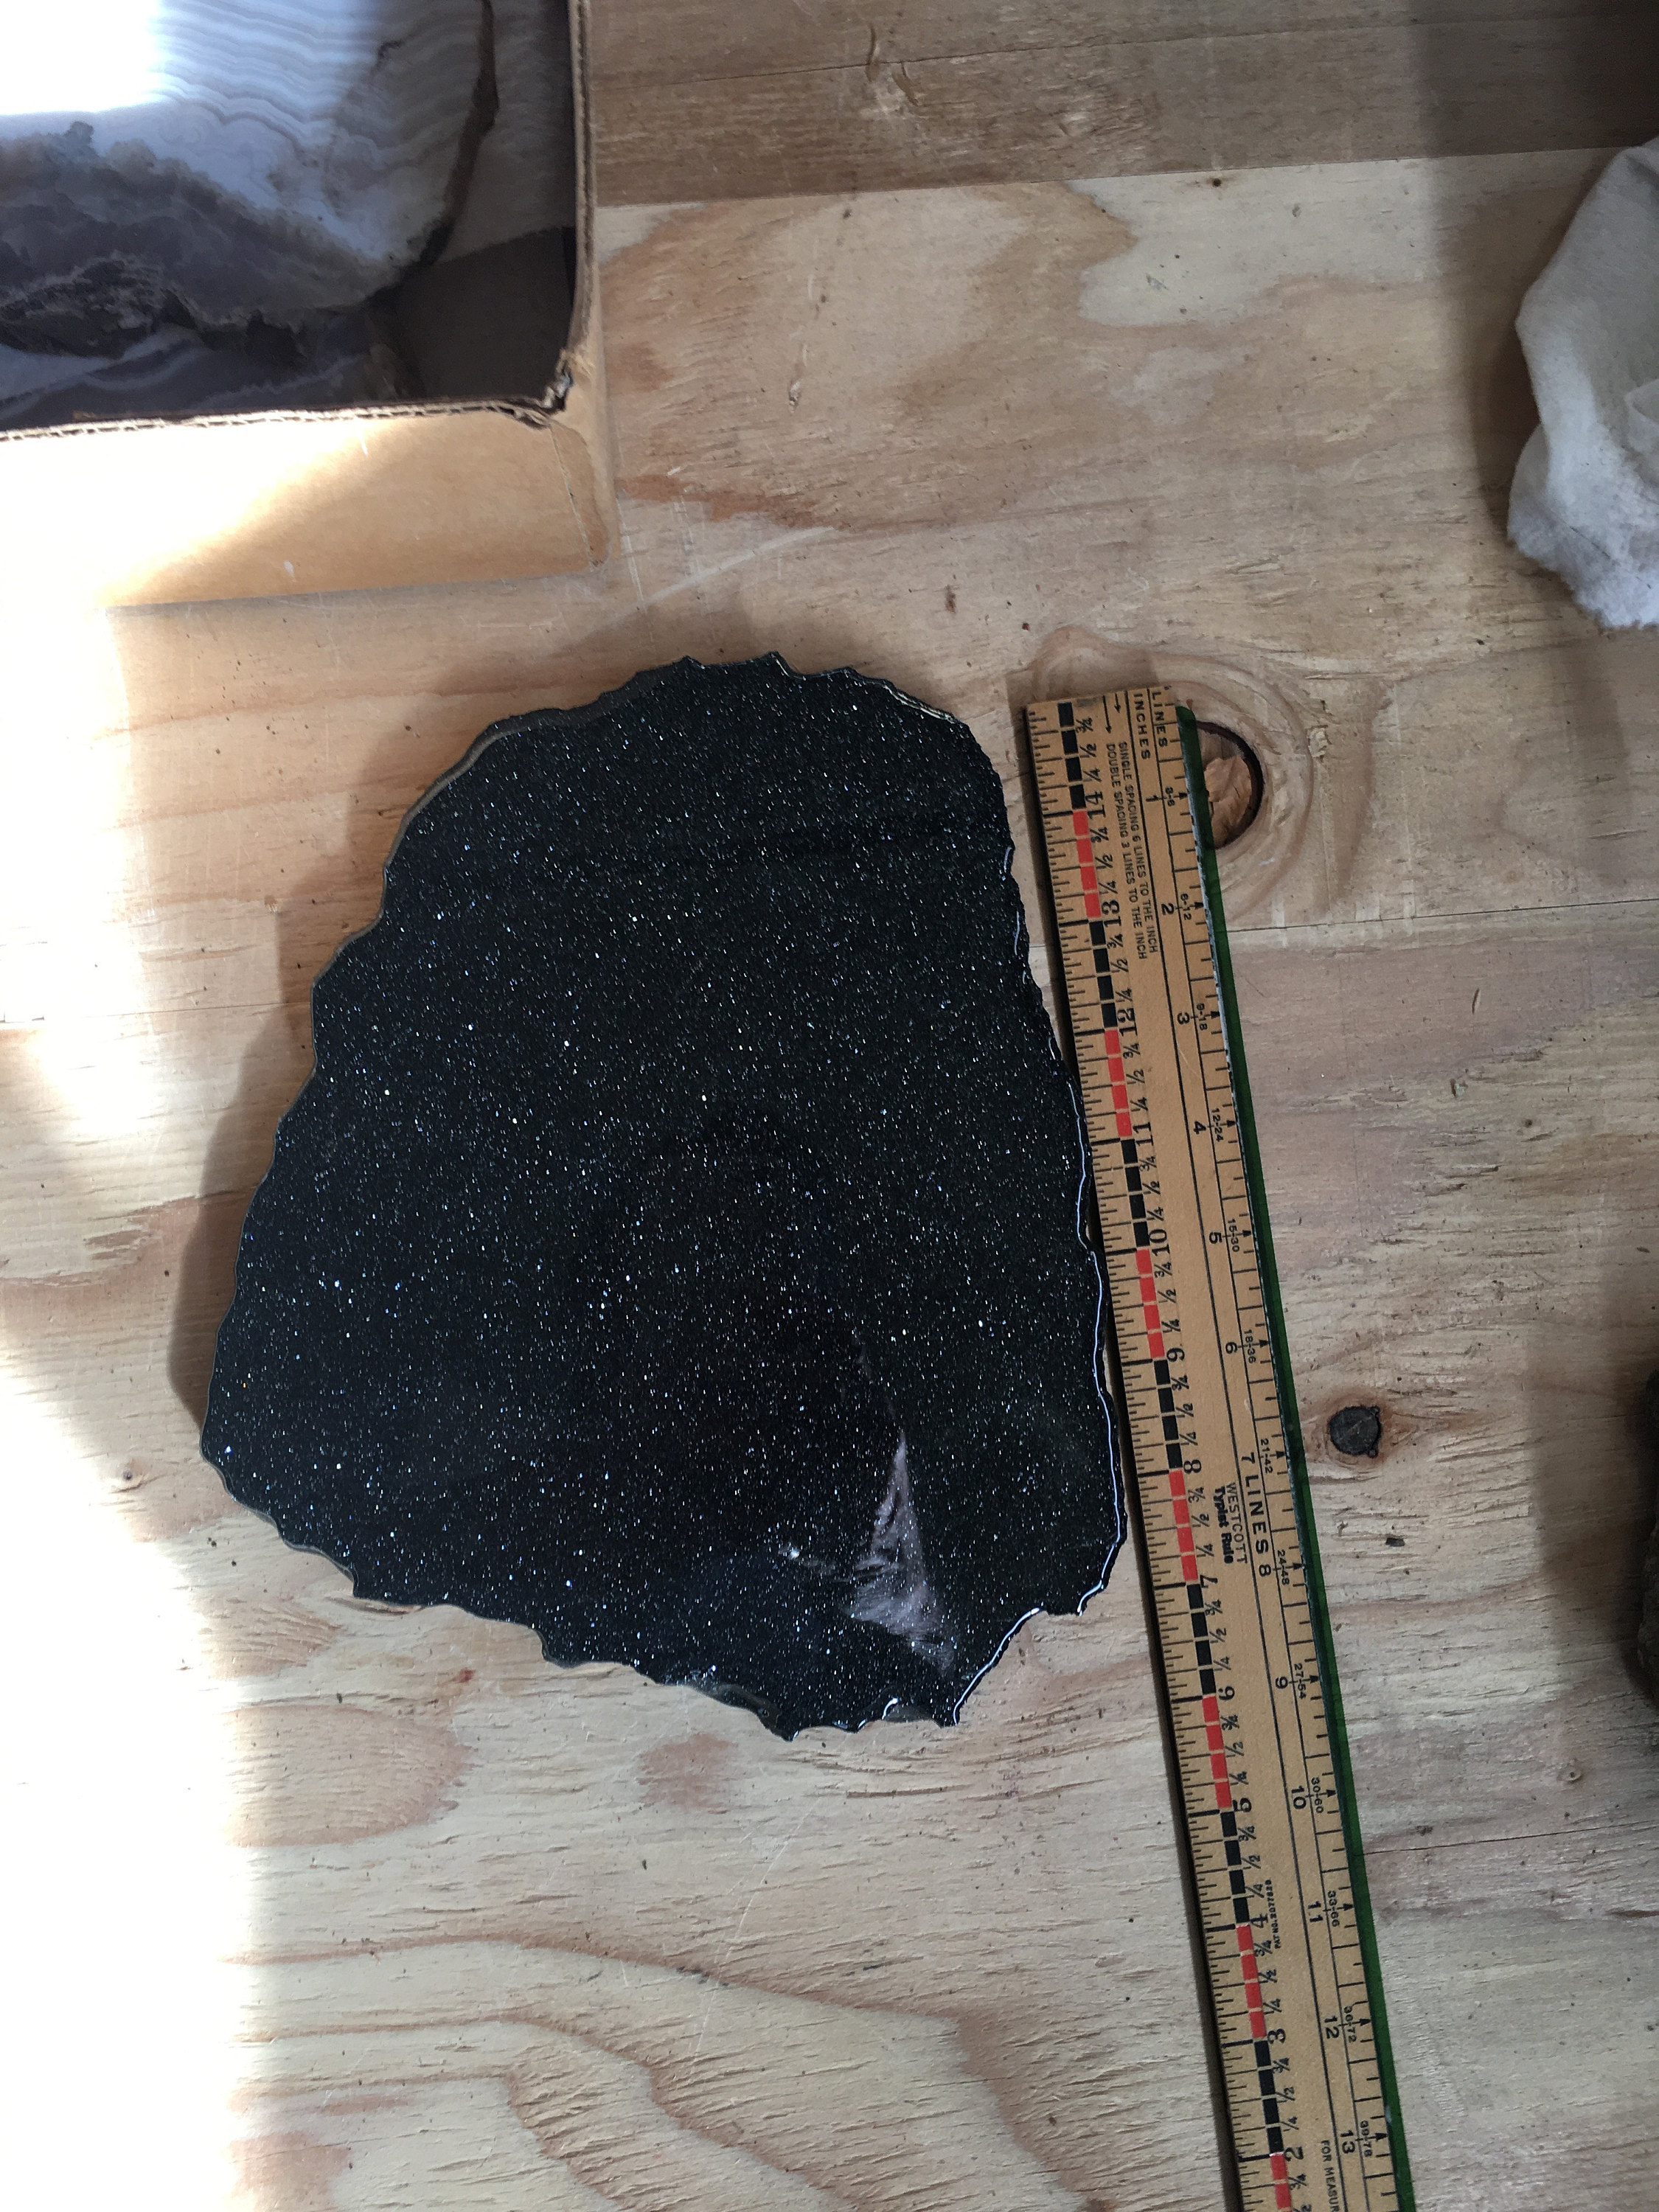 A large slab of hematite available for a table top